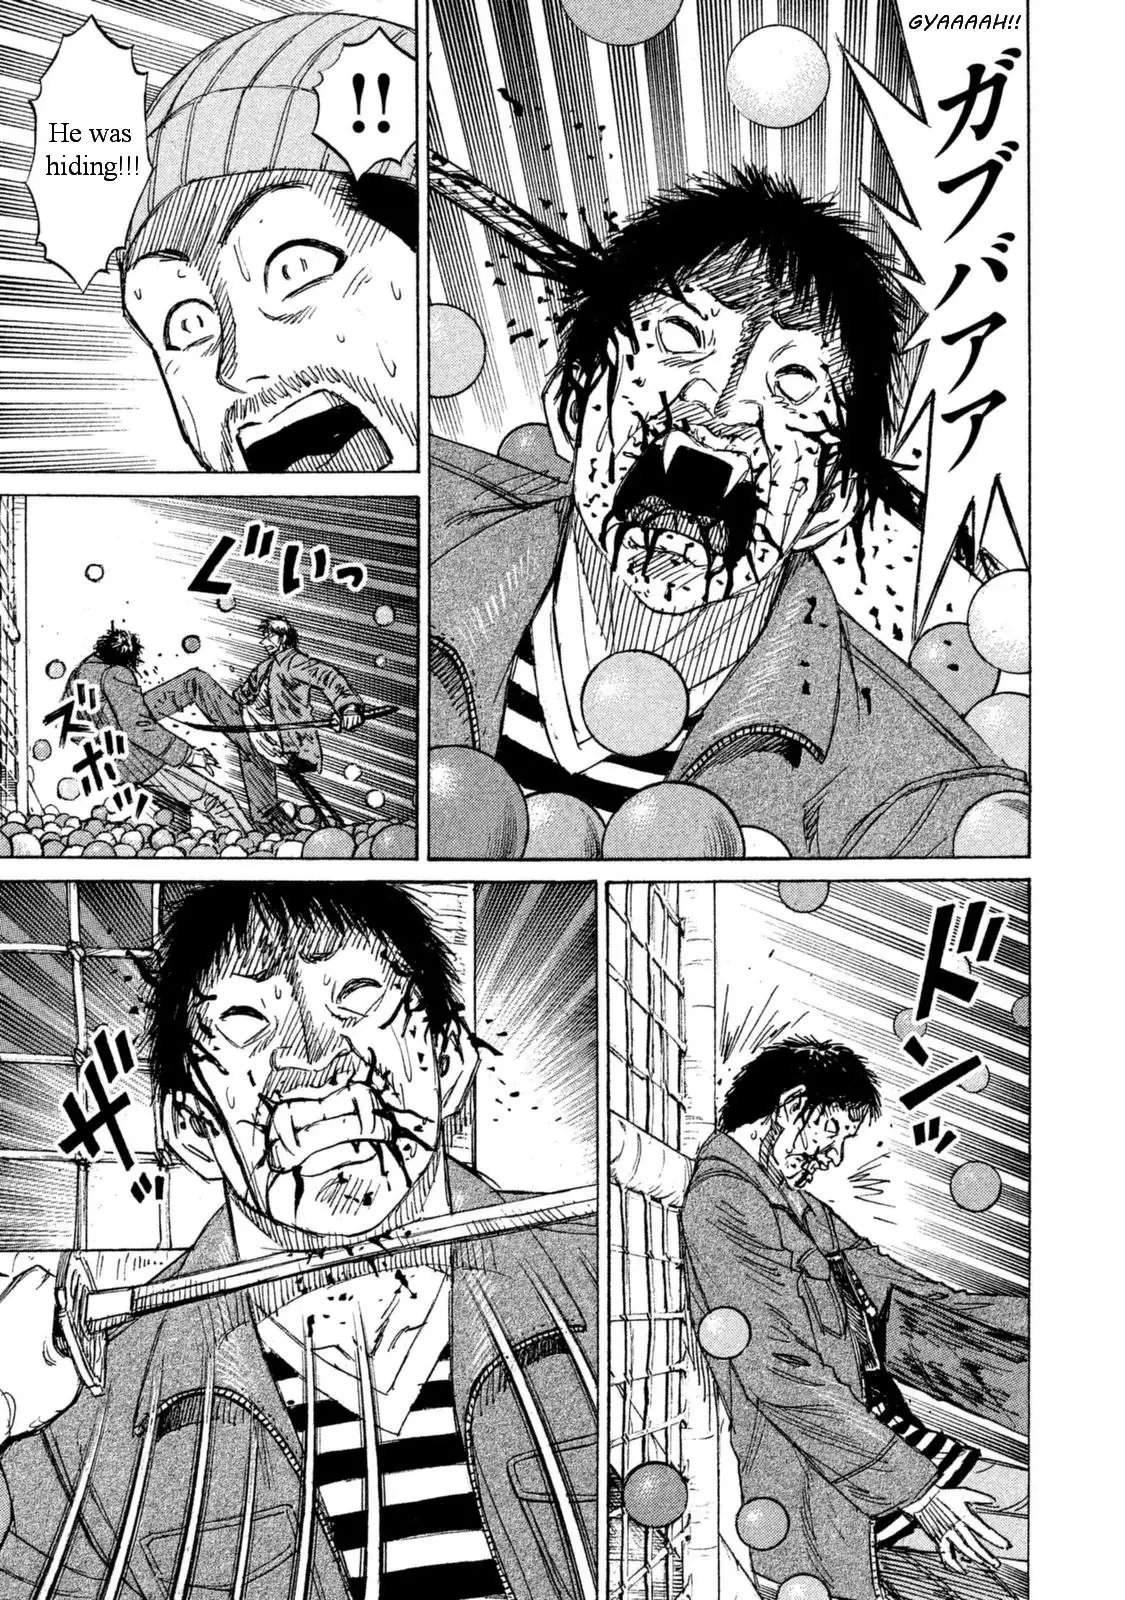 Higanjima - 48 Days Later - 7 page 13-6287551d